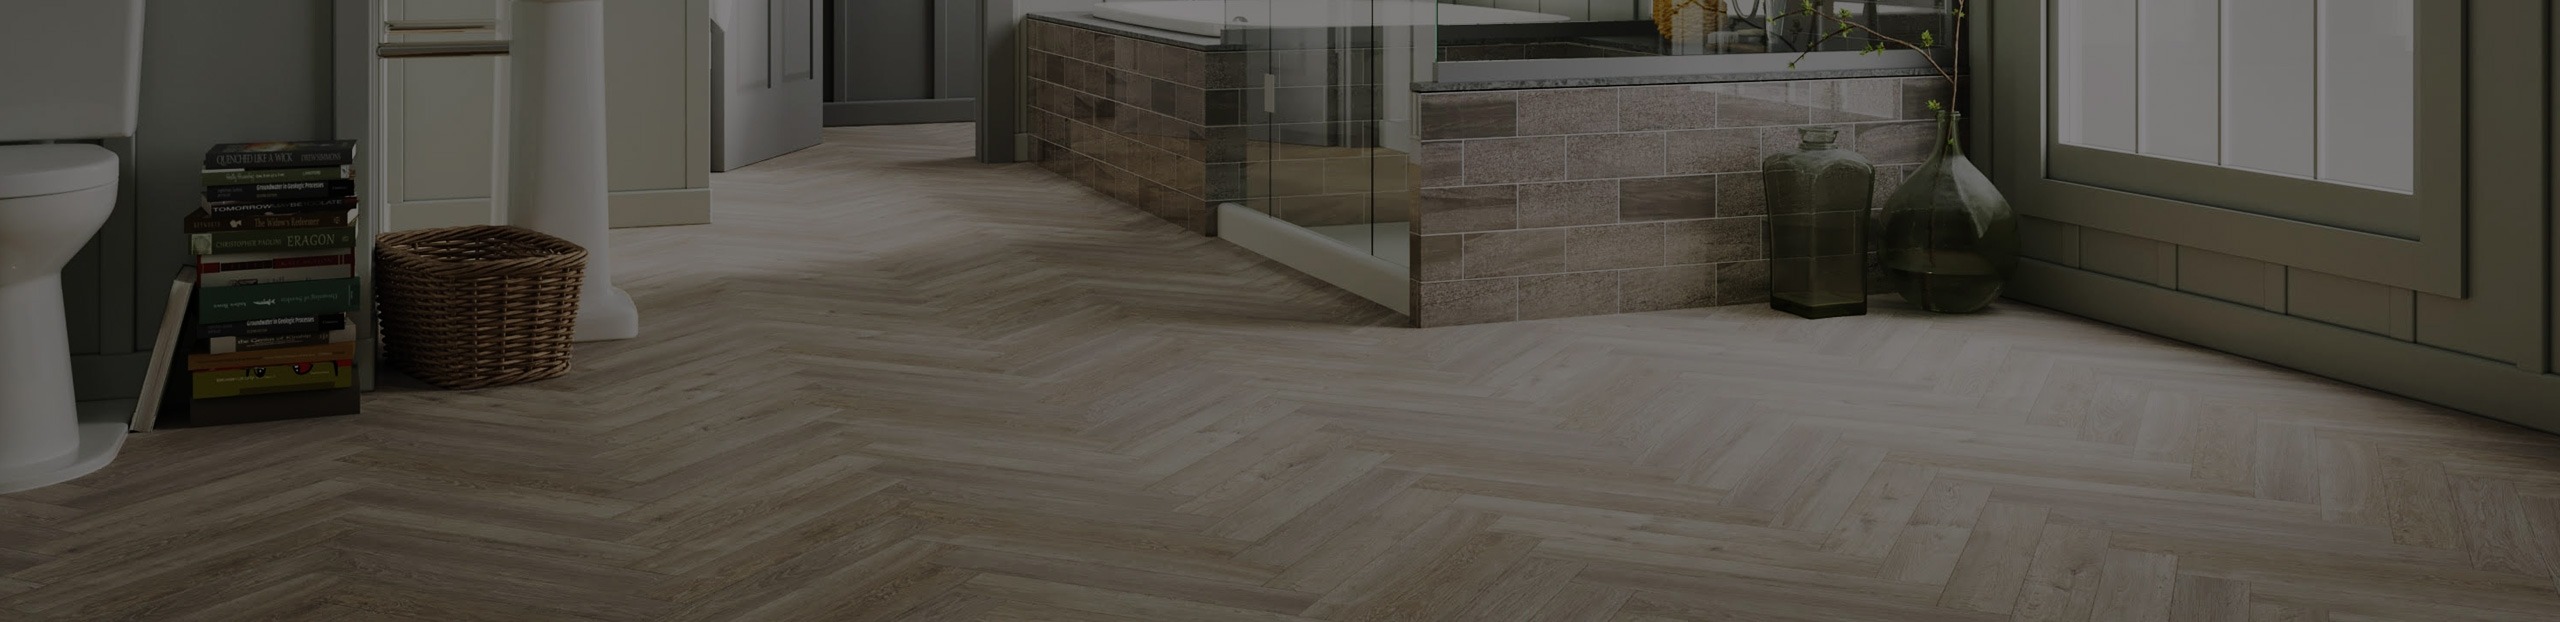 flooring products